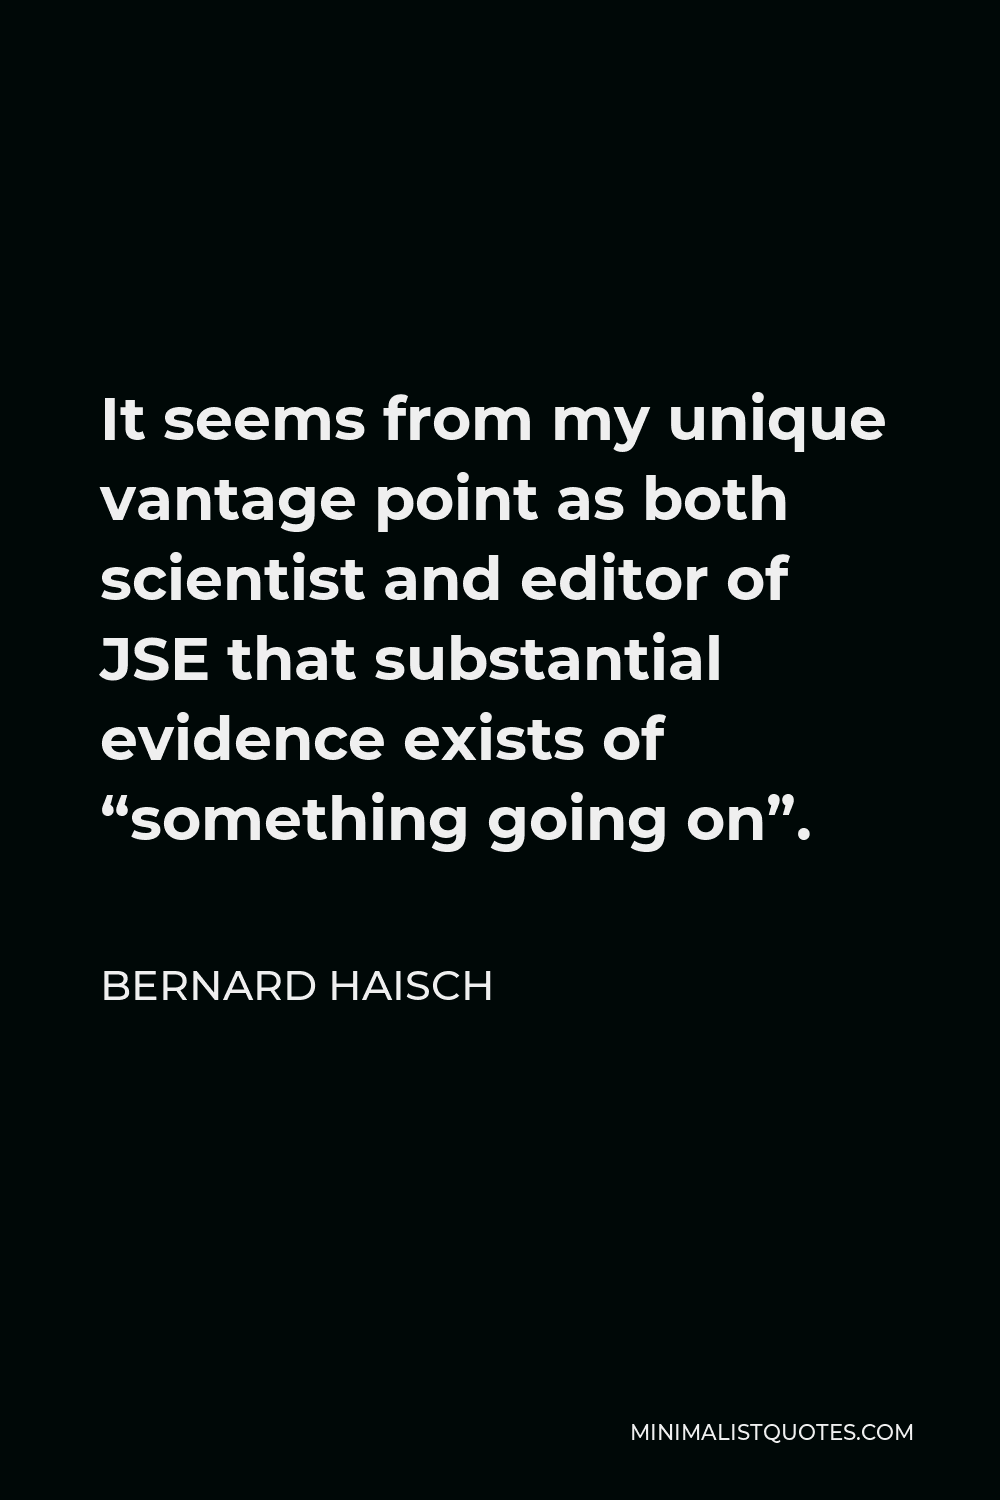 Bernard Haisch Quote - It seems from my unique vantage point as both scientist and editor of JSE that substantial evidence exists of “something going on”.